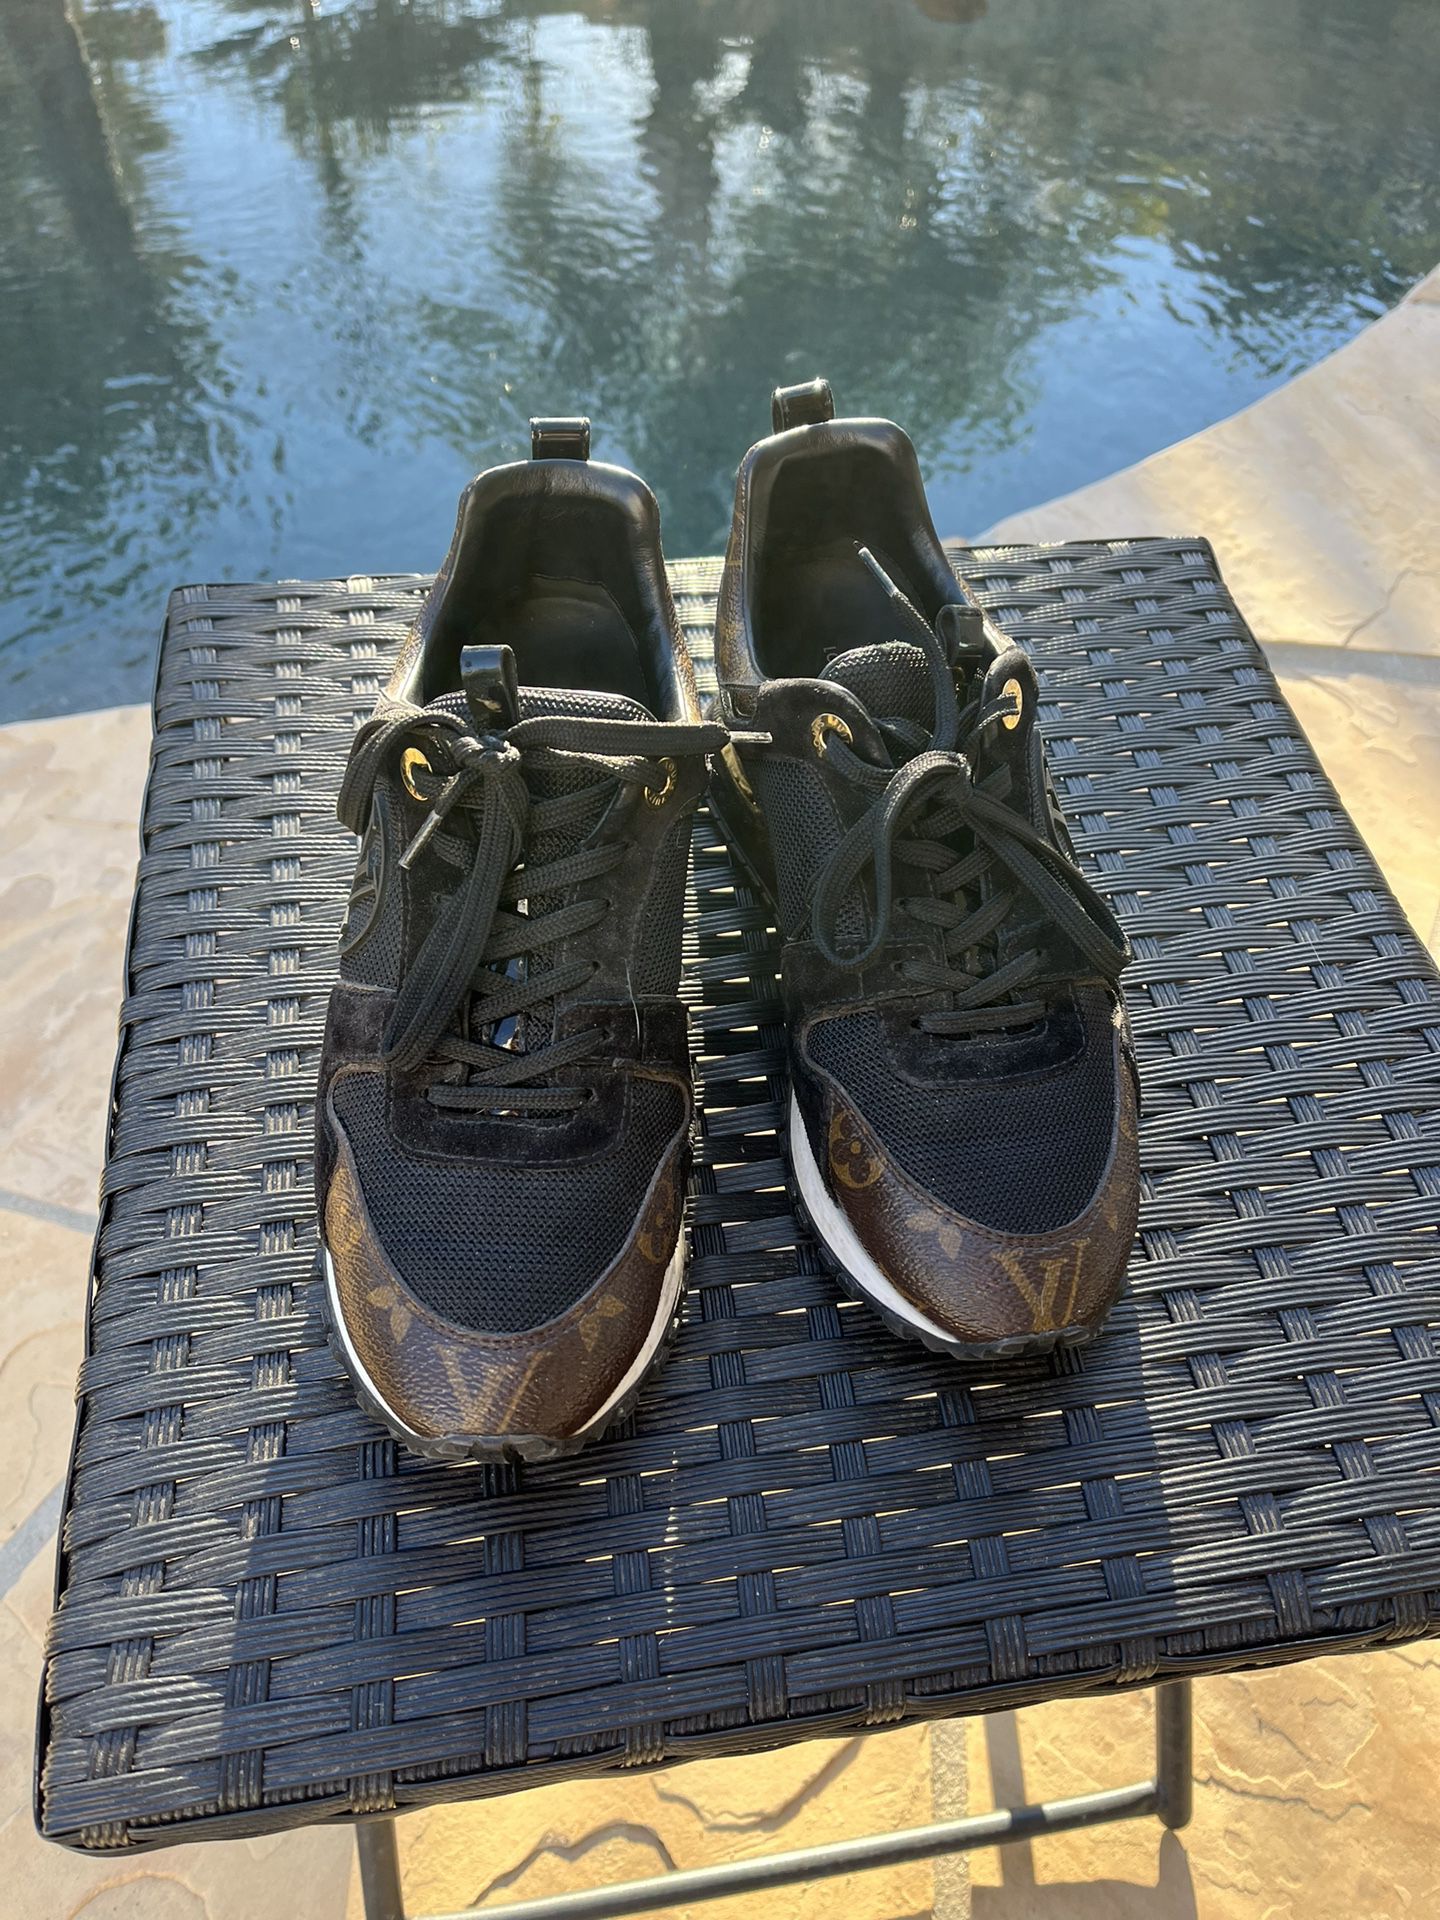 LV “Louis Vuitton” runaway sneakers for Sale in Los Angeles, CA - OfferUp